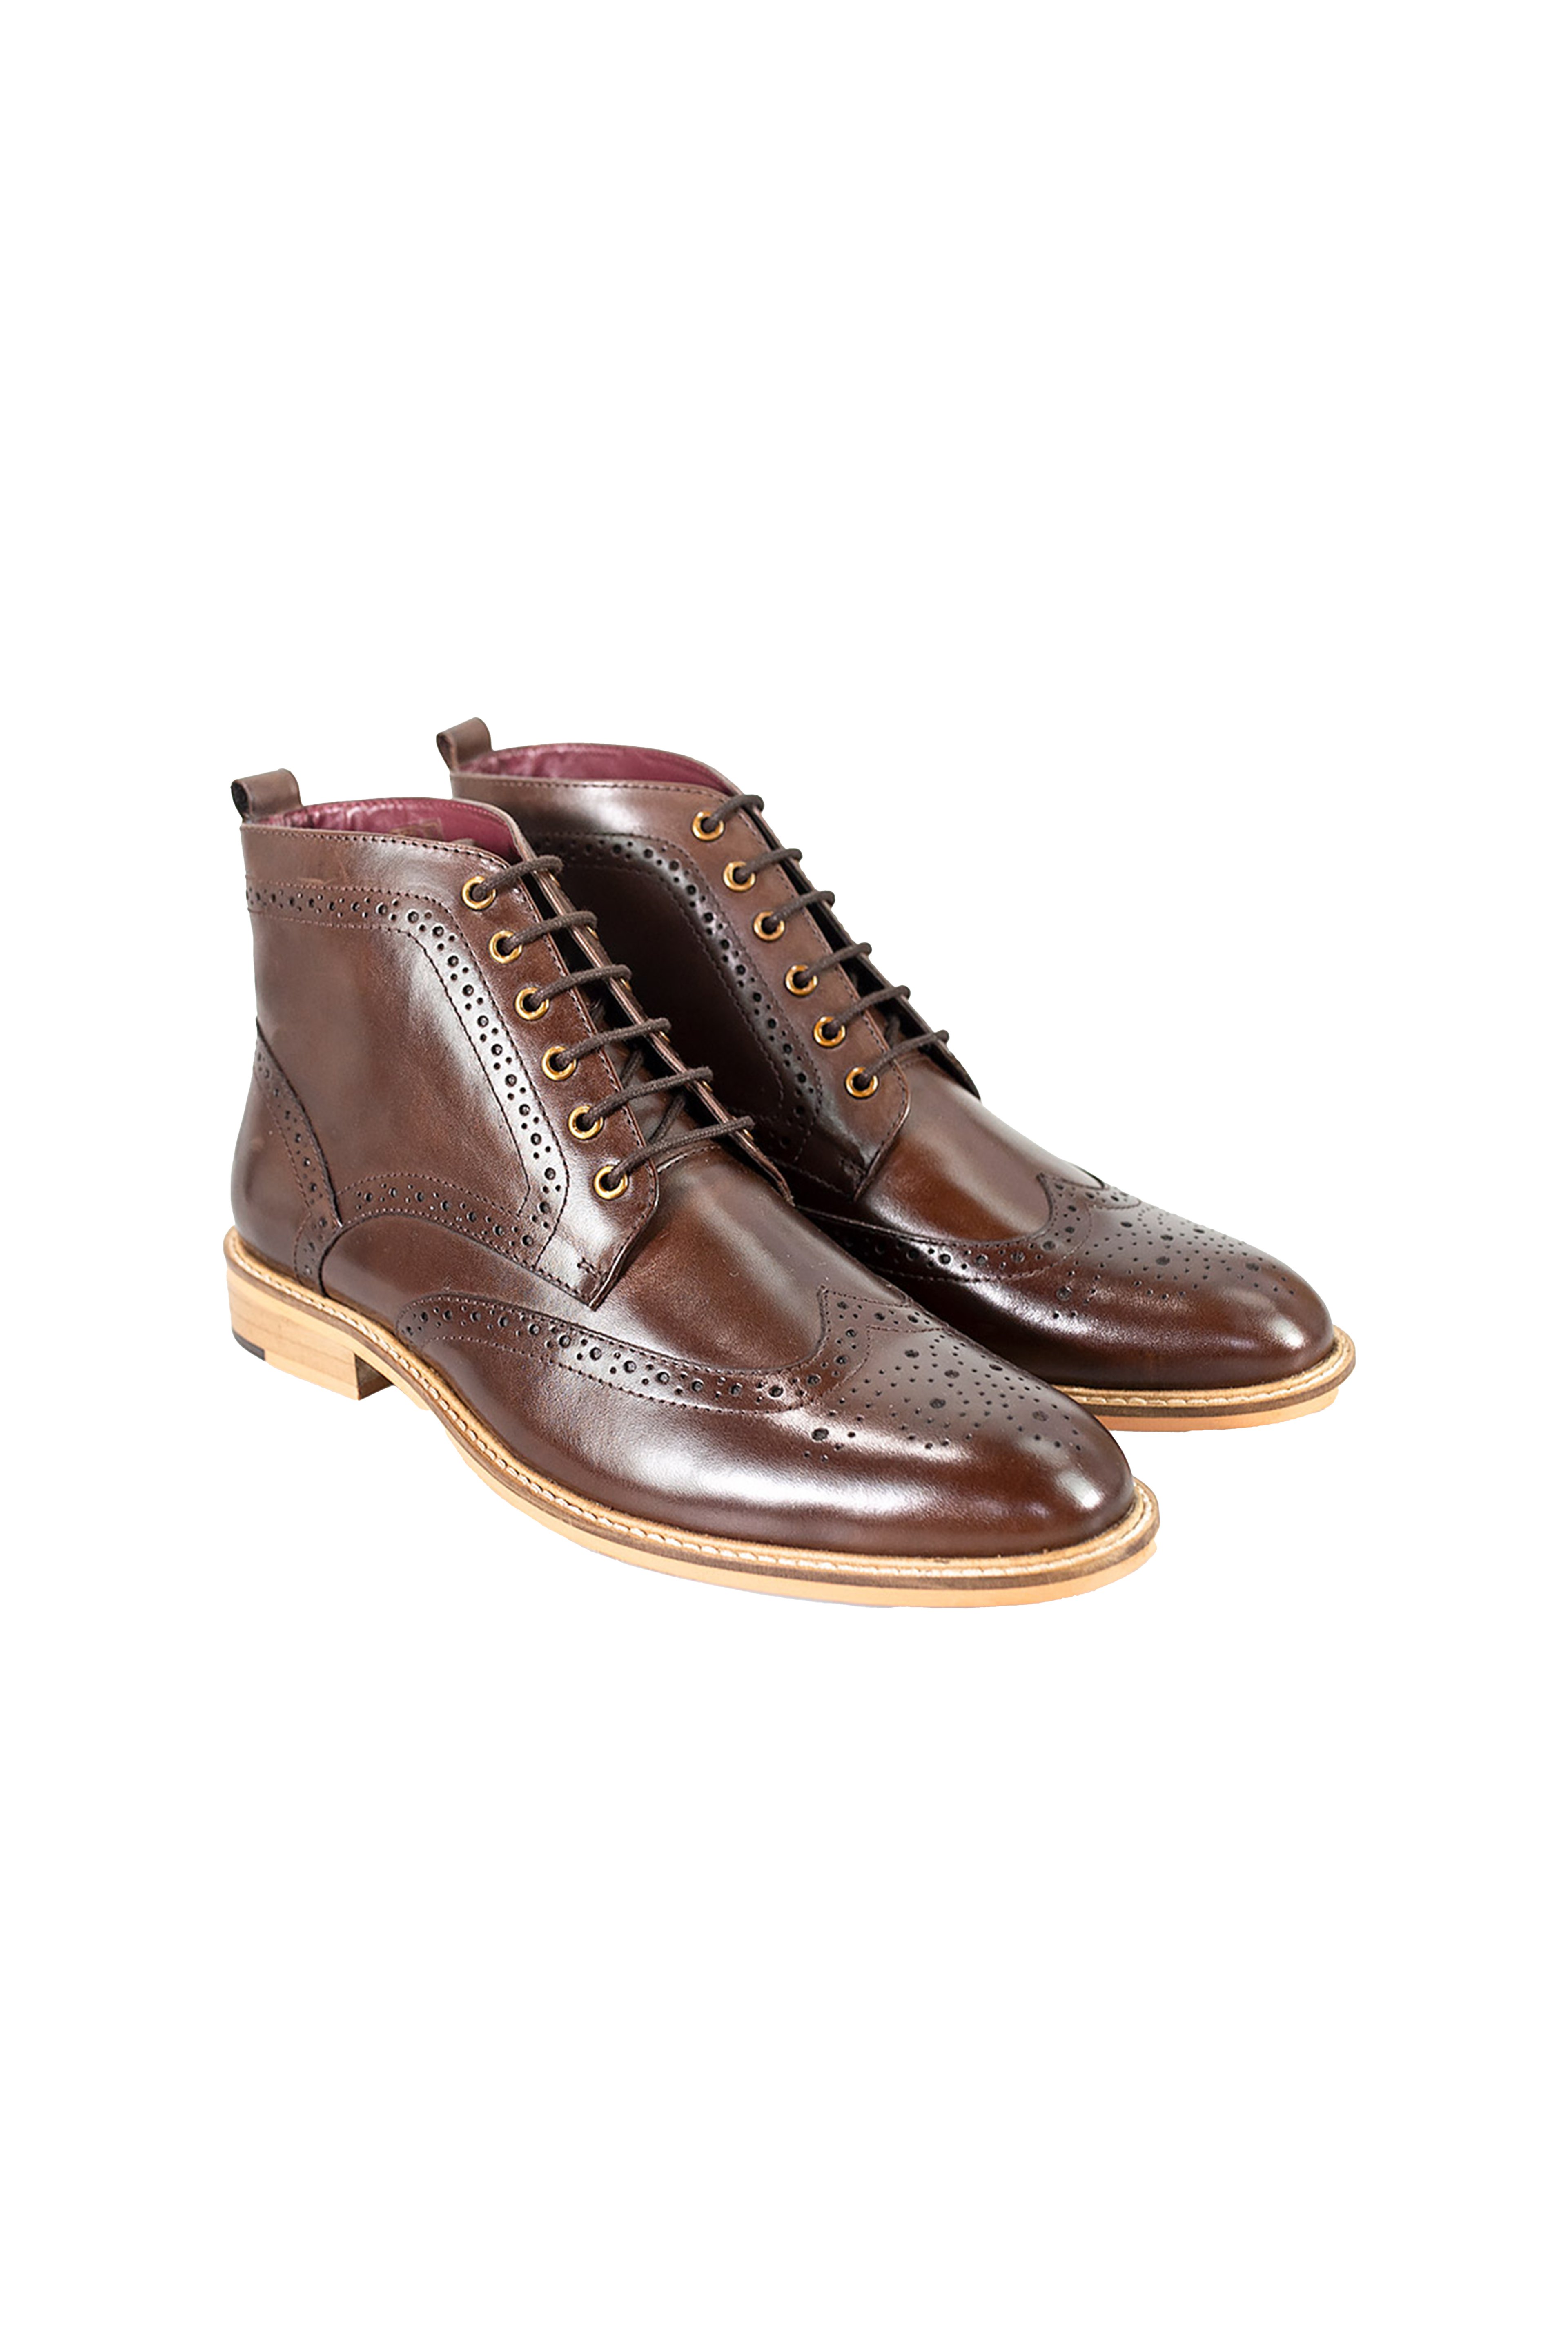 Men's Leather Lace up Brogue Boots - HOLMES - Dark Brown